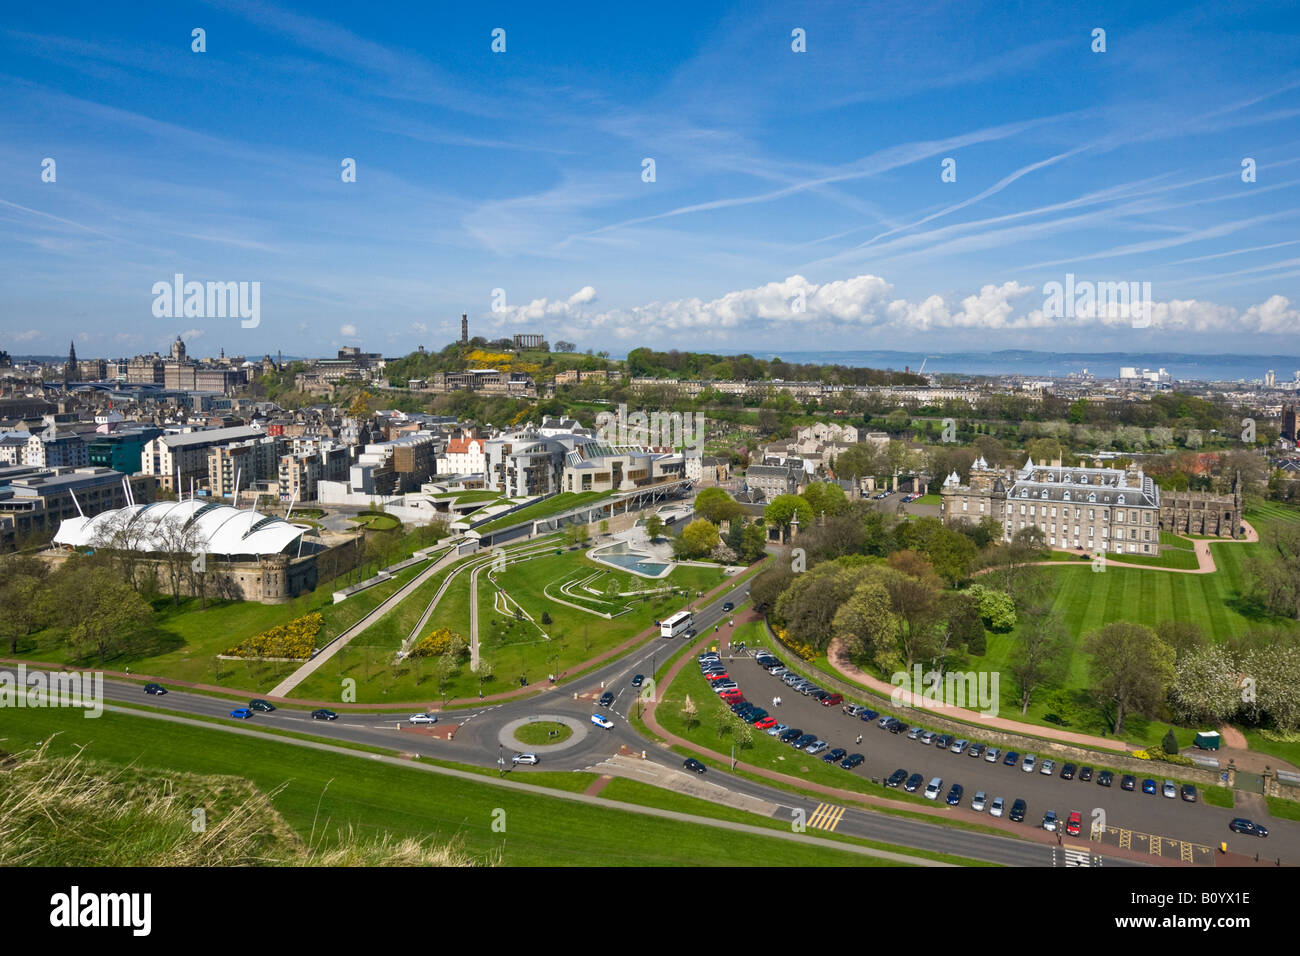 View of Our Dynamic Earth (left) The Scottish Parliament (centre) Calton Hill (behind) and Palace of Holyroodhouse (r) Edinburgh Stock Photo